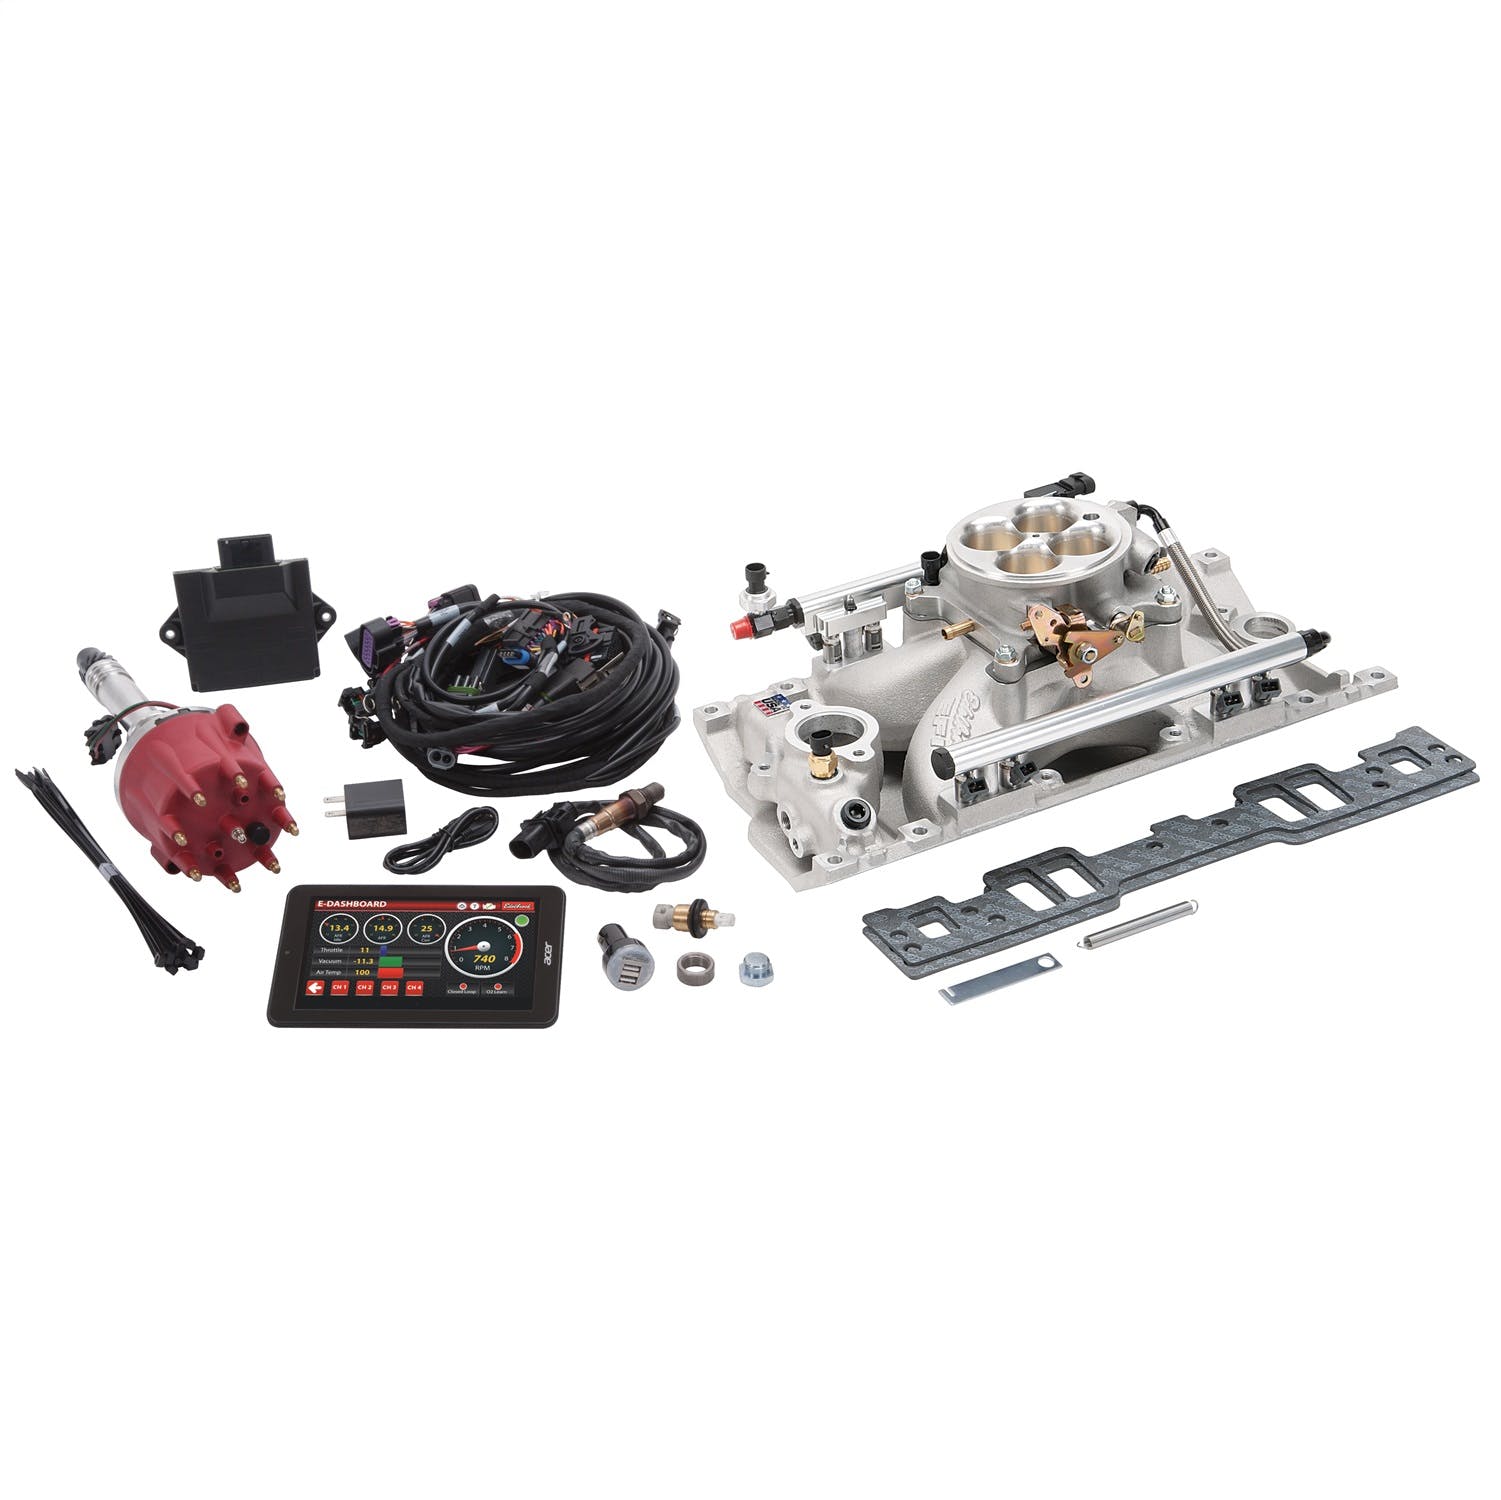 Edelbrock 35780 Pro-Flo 4 EFI Kit for Small-Block Chevy with Vortec/E-Tec Cylinderinder Heads